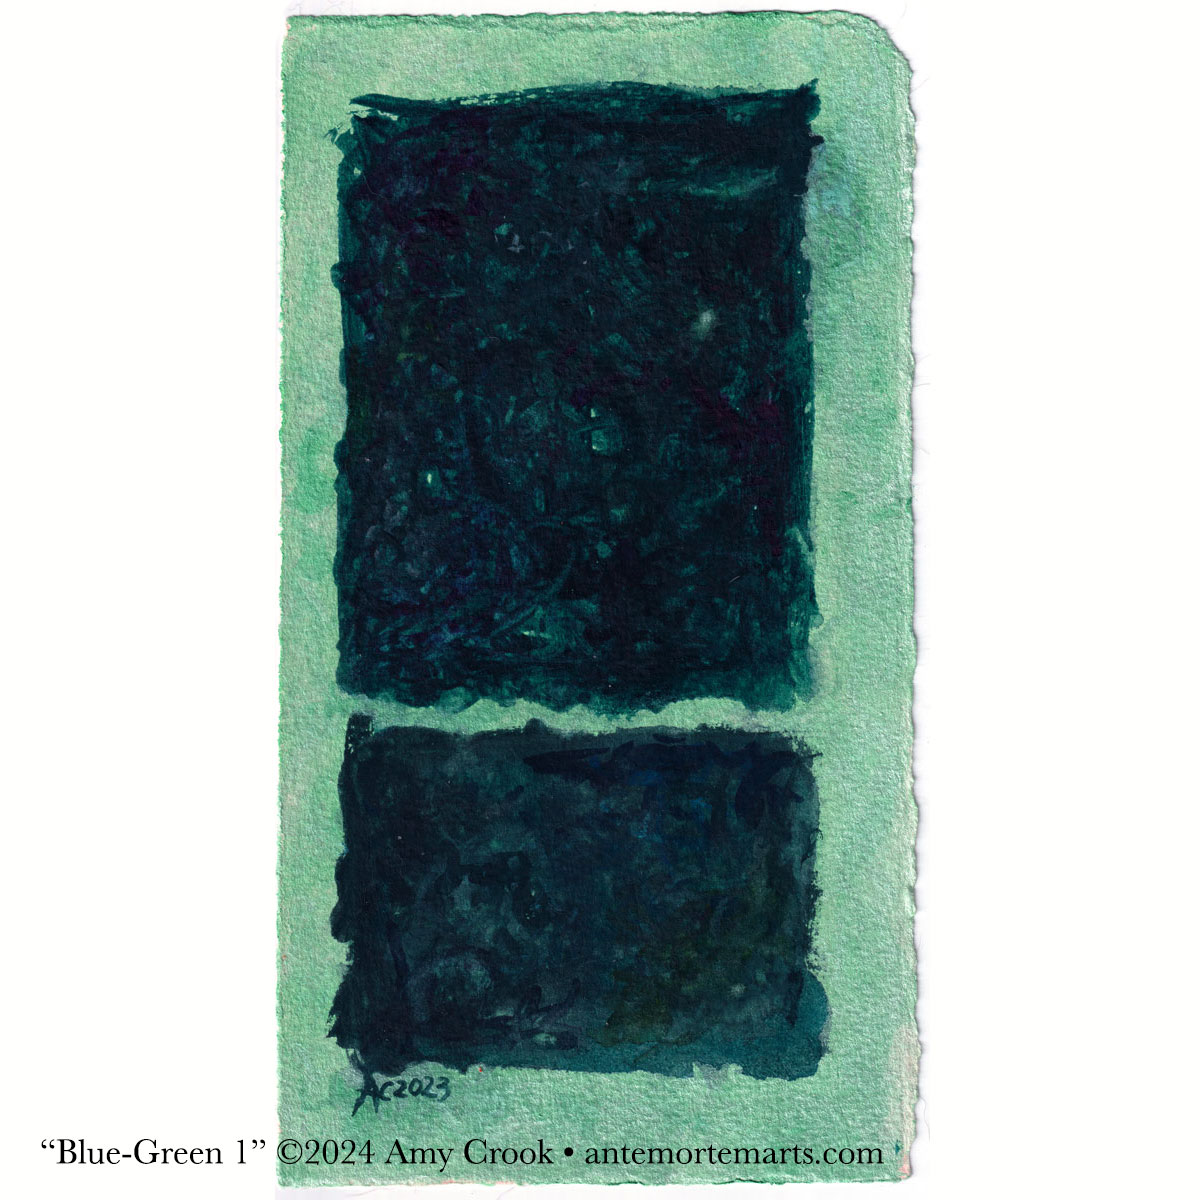 Blue-Green 1 by Amy Crook